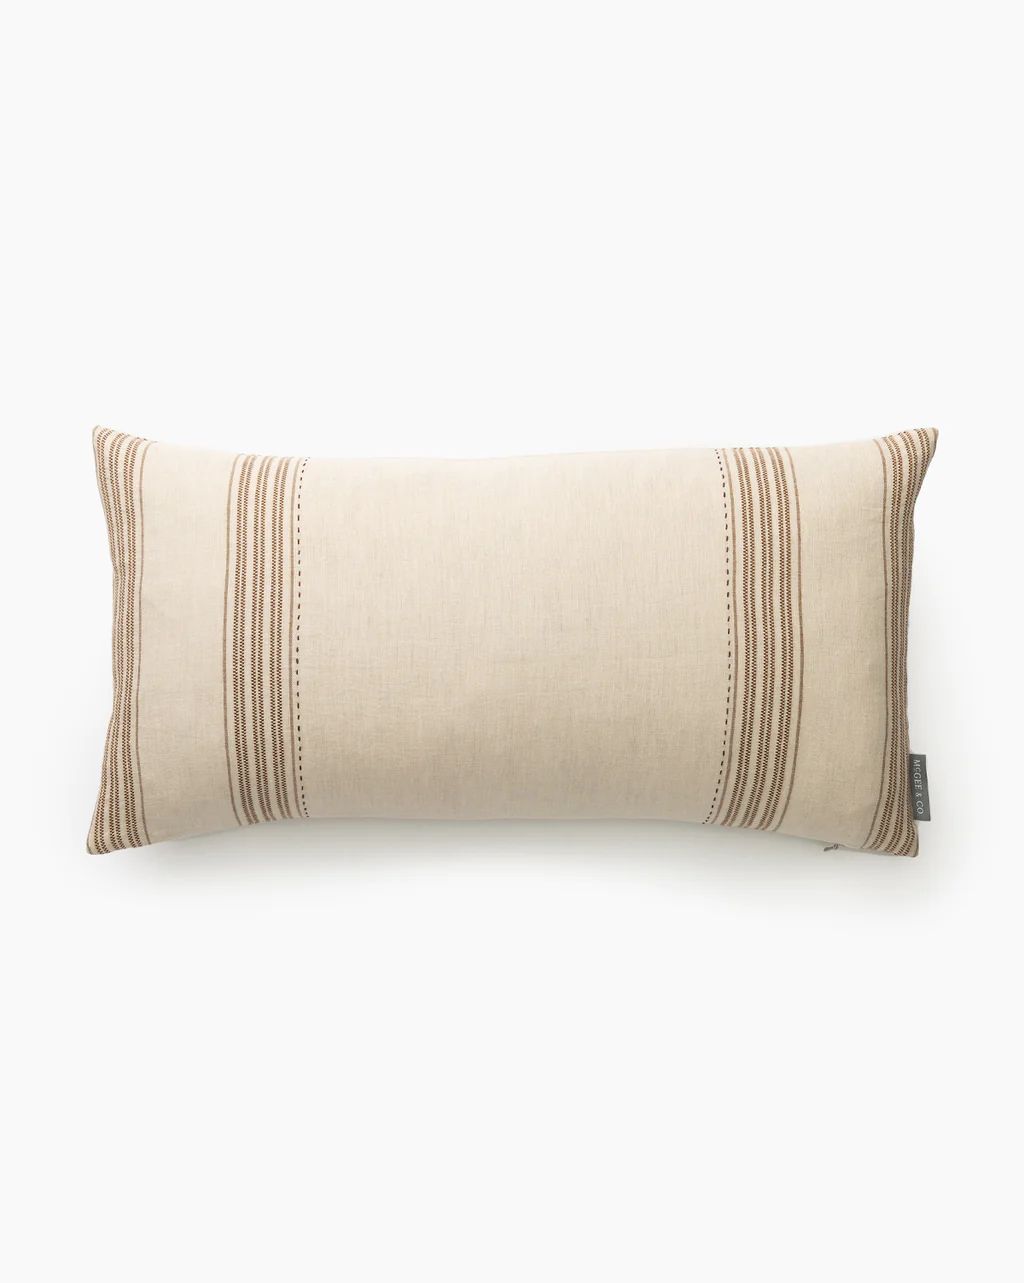 Jennings Pillow Cover | McGee & Co.